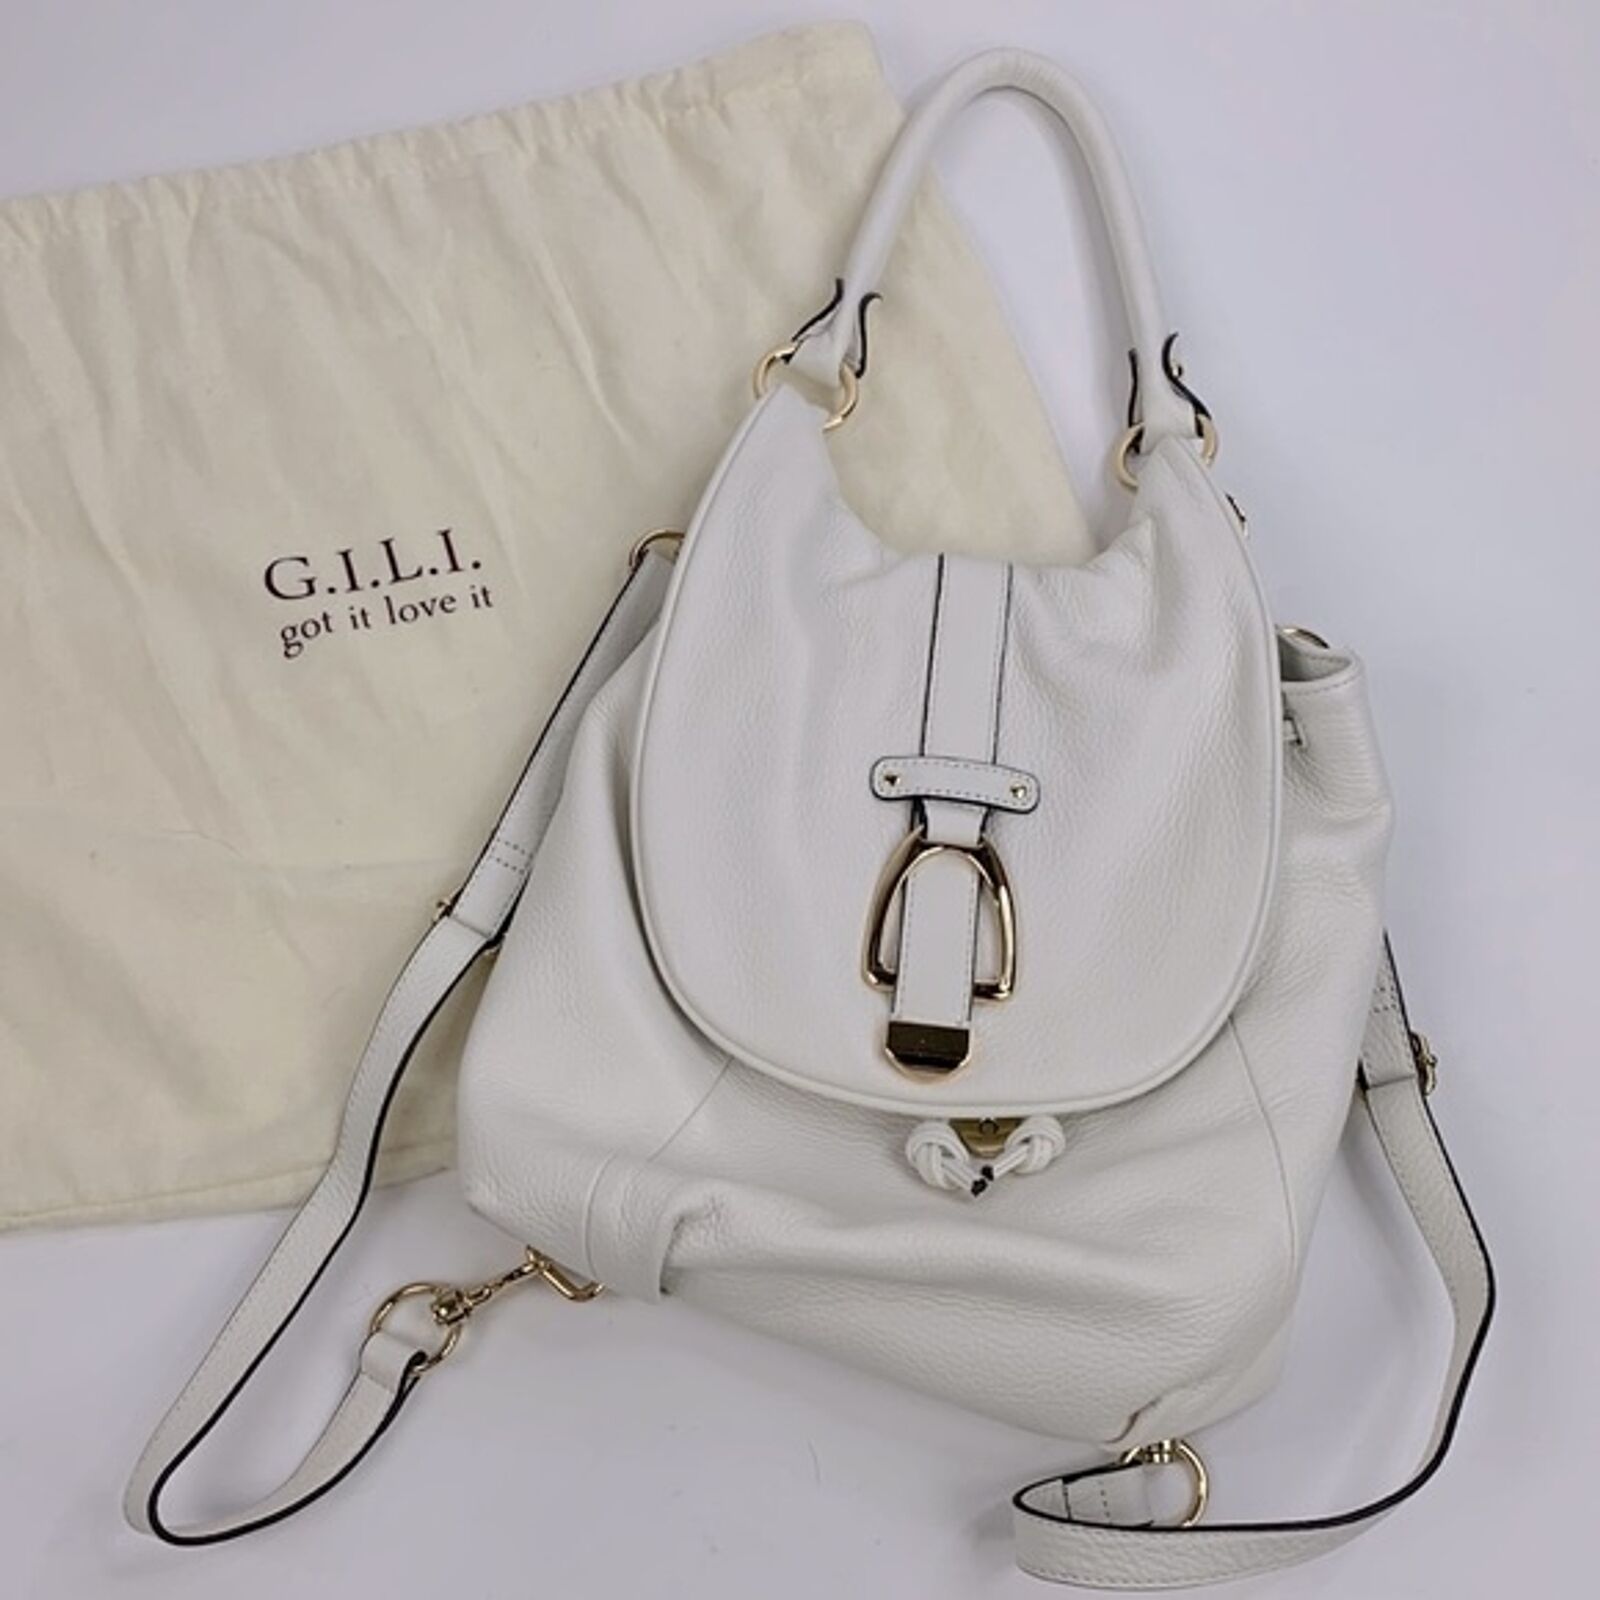 GILI White leather Backpack purse bag Gold hardware Lined Dustbag